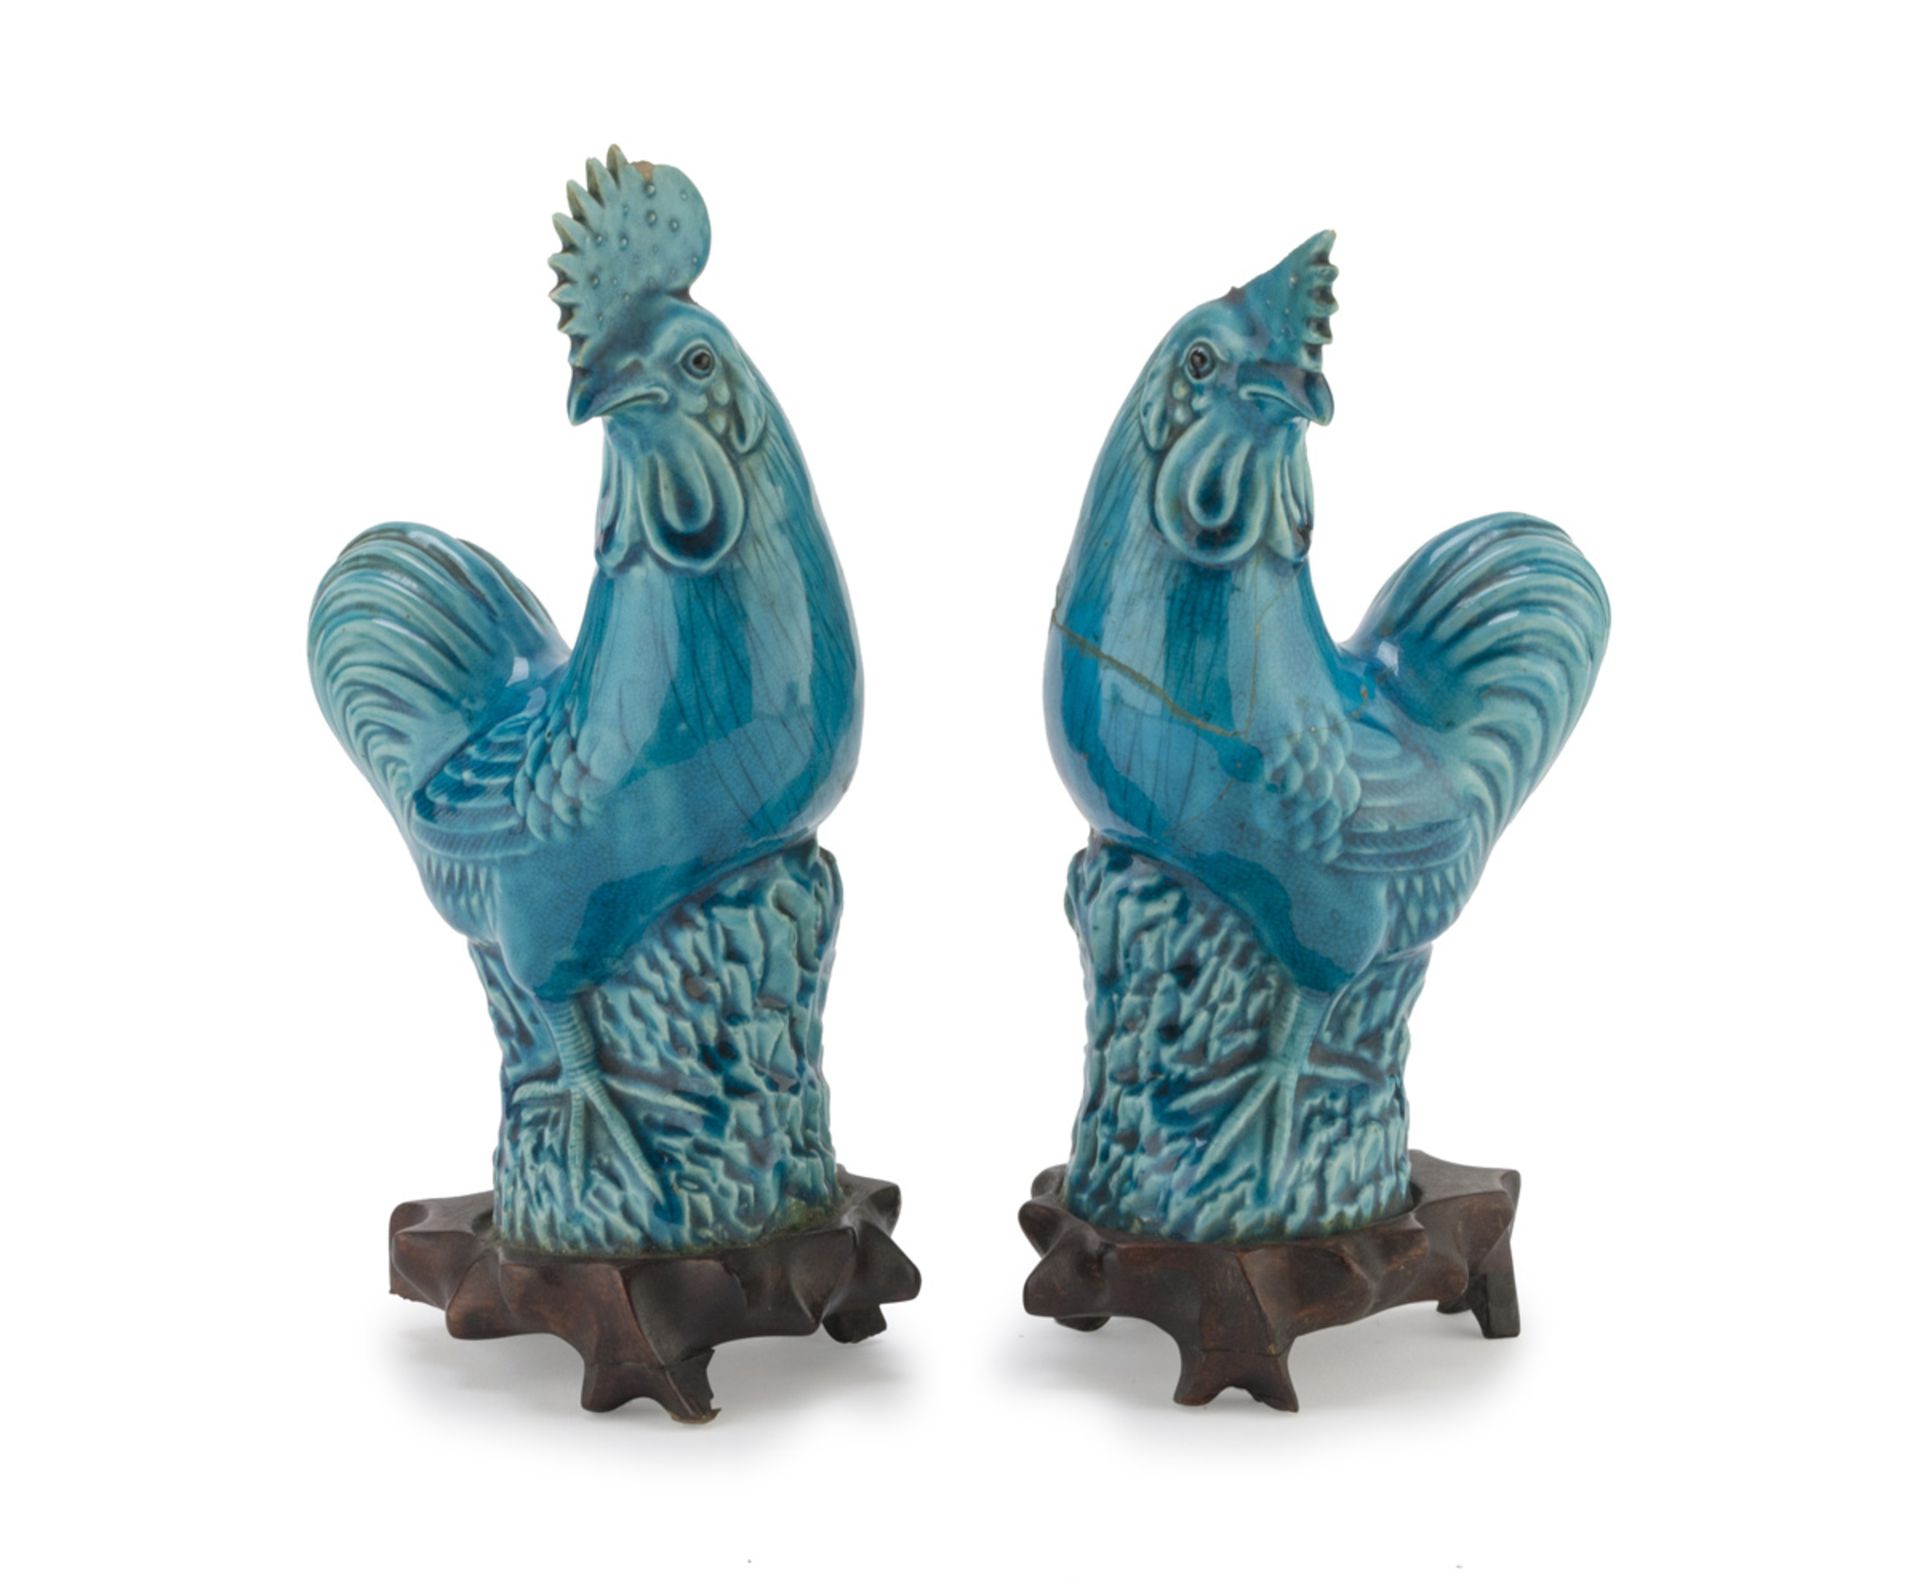 A PAIR OF SCULPTURES IN GLAZED CERAMICS, CHINA, 20TH CENTURY representing two roosters on big rocks.